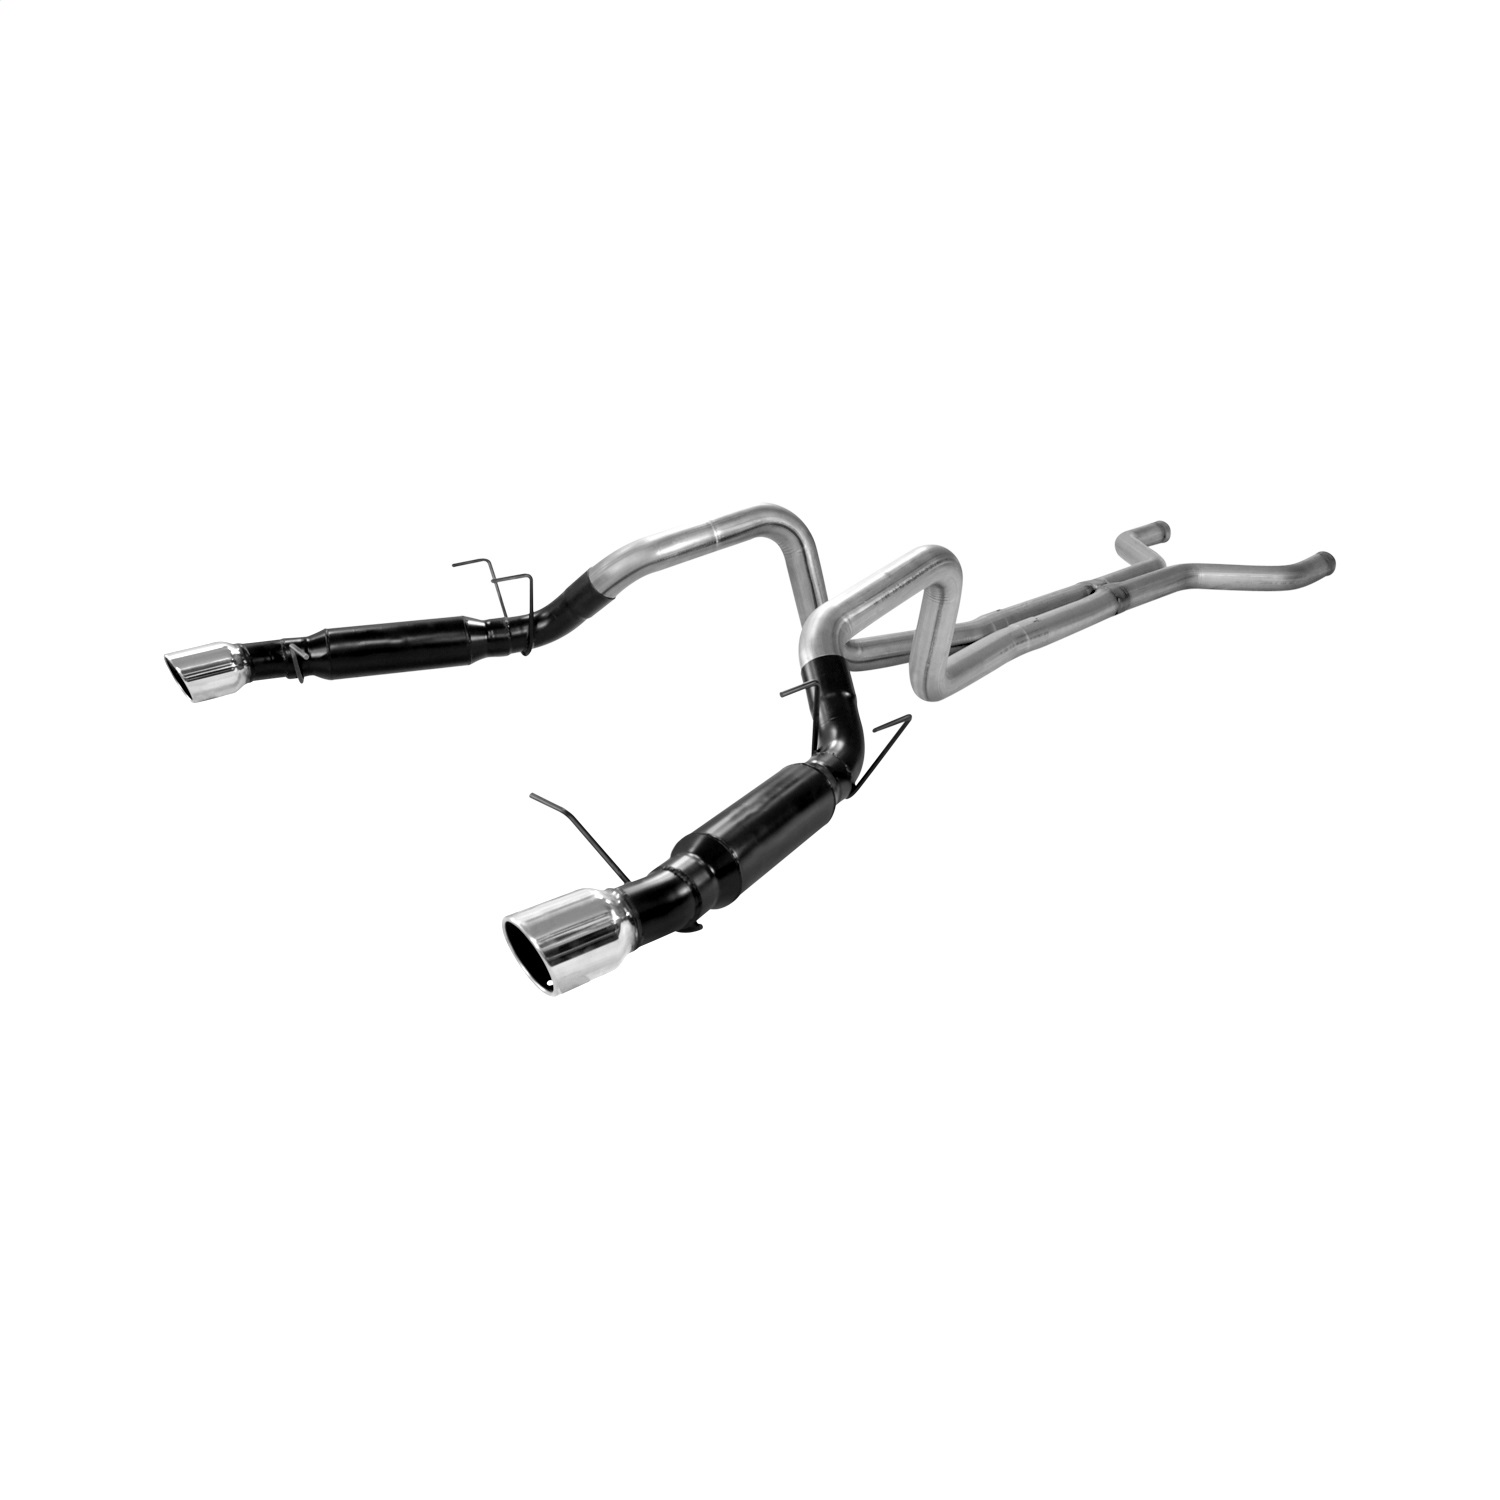 Flowmaster Flowmaster 817590 Outlaw Series Cat Back Exhaust System Fits 13-14 Mustang